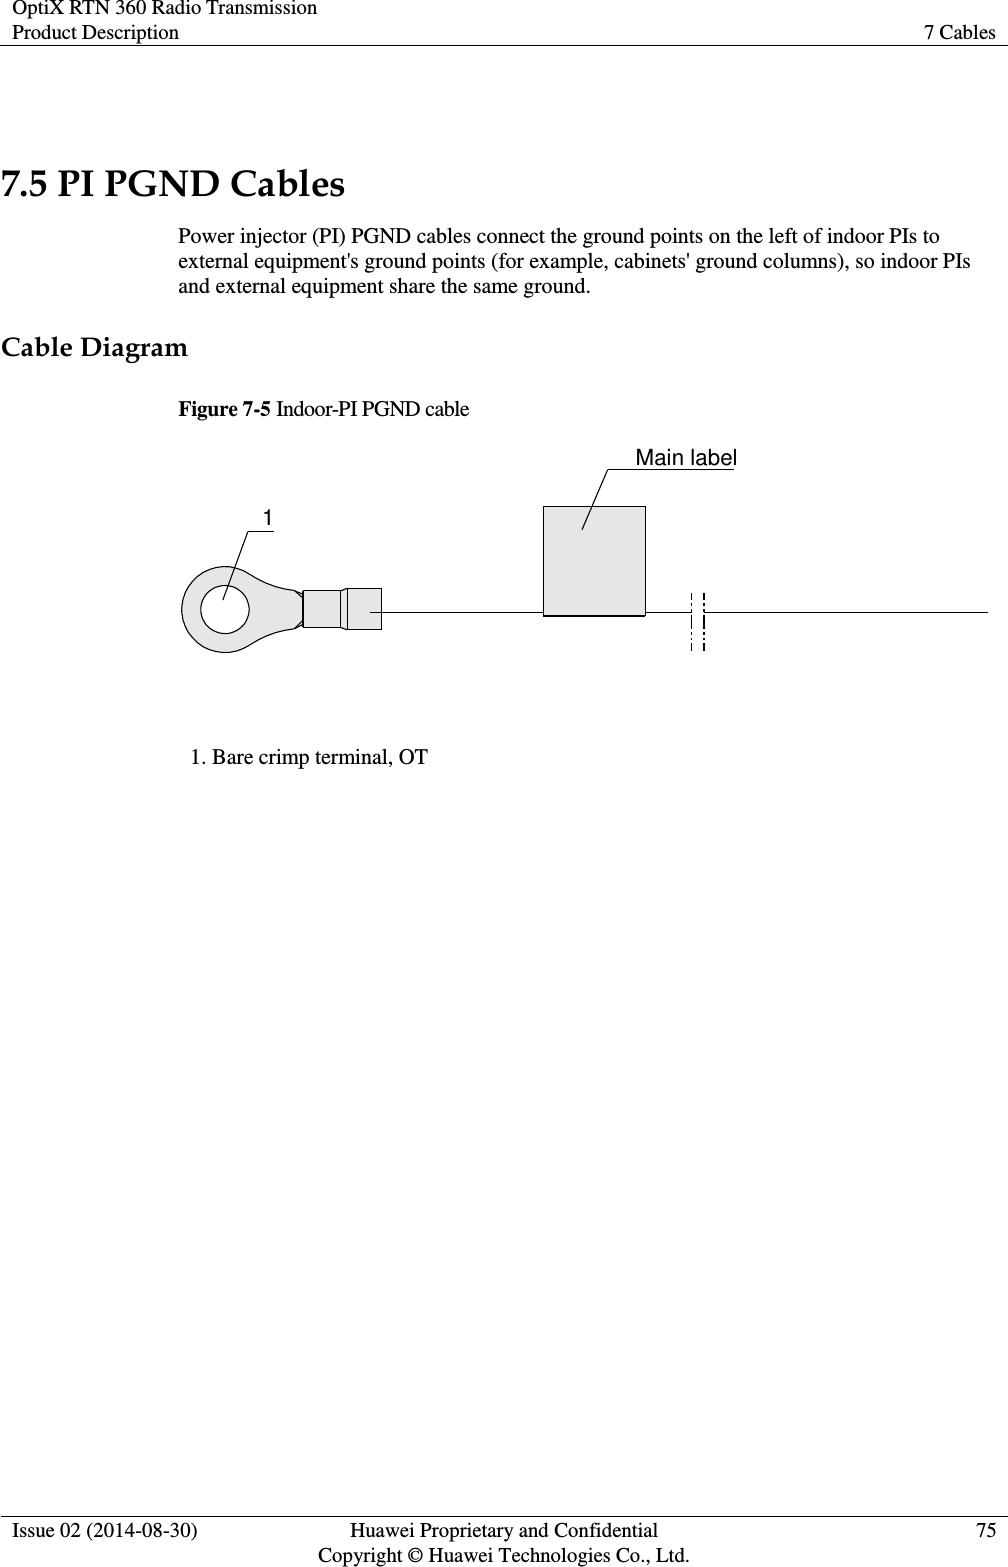 OptiX RTN 360 Radio Transmission Product Description 7 Cables  Issue 02 (2014-08-30) Huawei Proprietary and Confidential                                     Copyright © Huawei Technologies Co., Ltd. 75   7.5 PI PGND Cables Power injector (PI) PGND cables connect the ground points on the left of indoor PIs to external equipment&apos;s ground points (for example, cabinets&apos; ground columns), so indoor PIs and external equipment share the same ground.   Cable Diagram Figure 7-5 Indoor-PI PGND cable Main label1 1. Bare crimp terminal, OT  